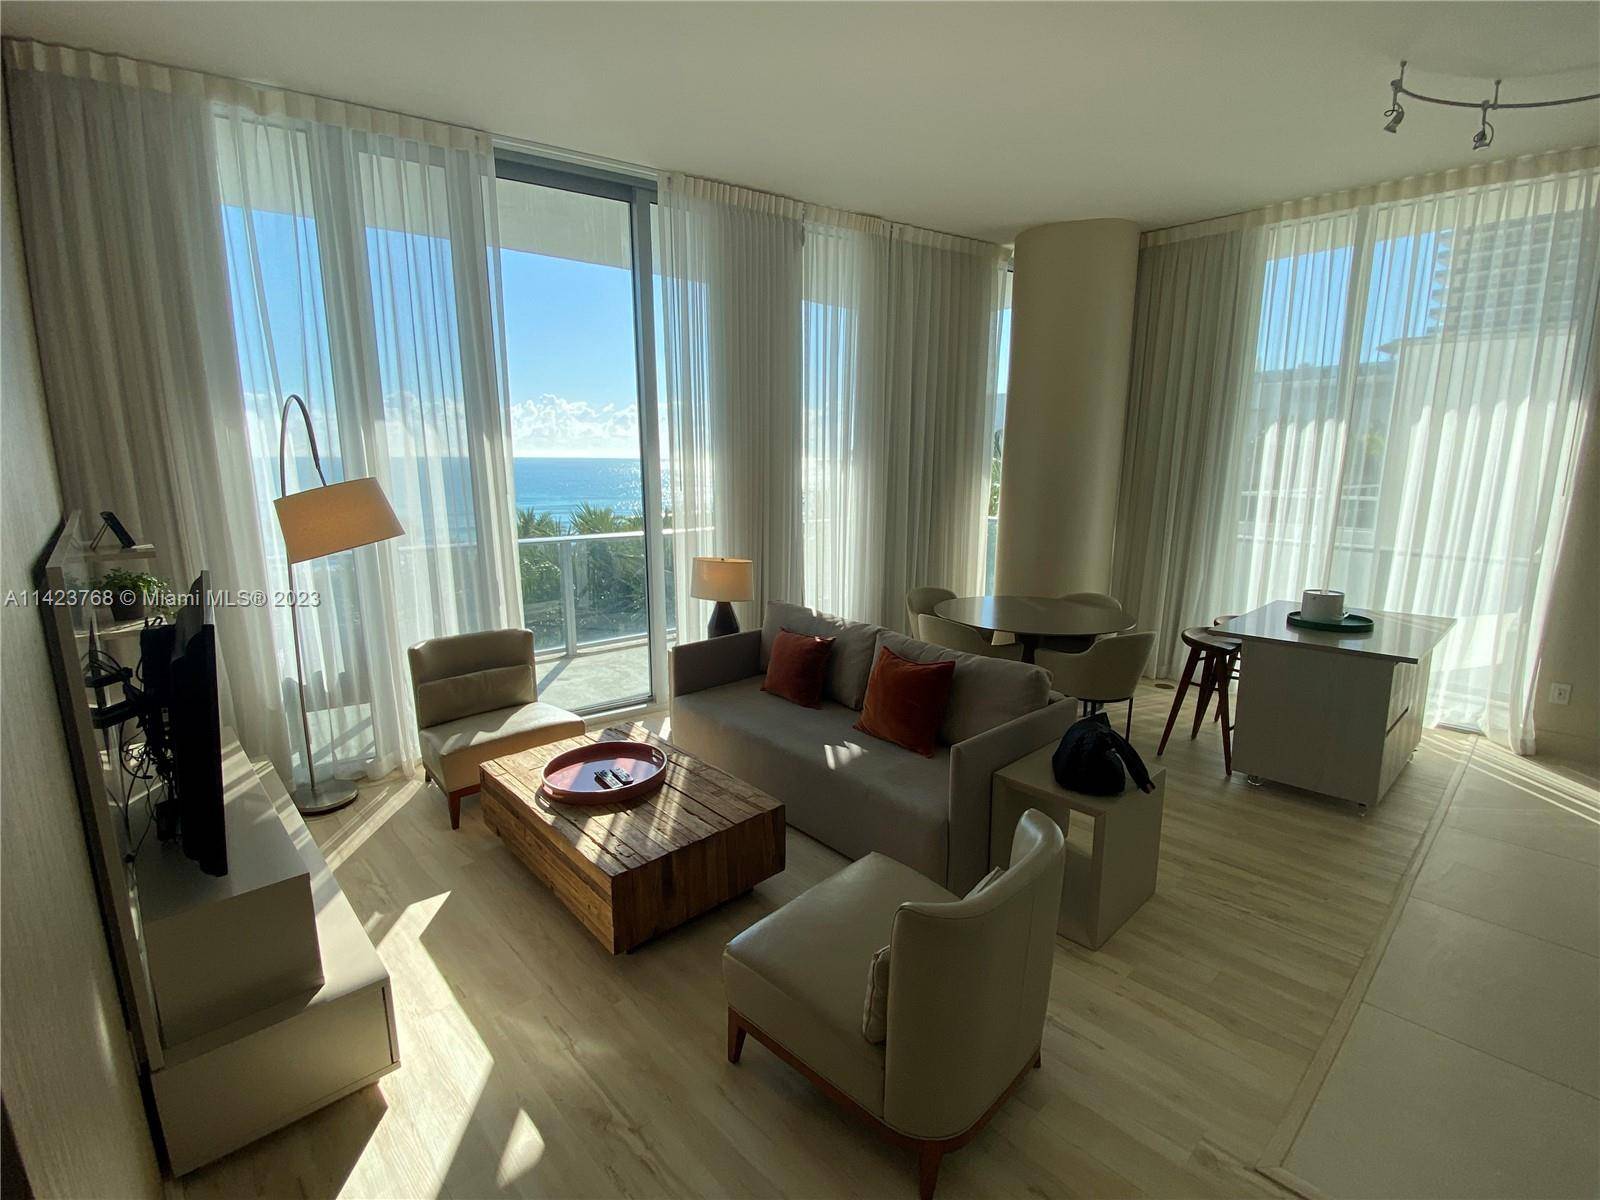 For sale Luxe oceanfront corner unit with no rental restrictions.